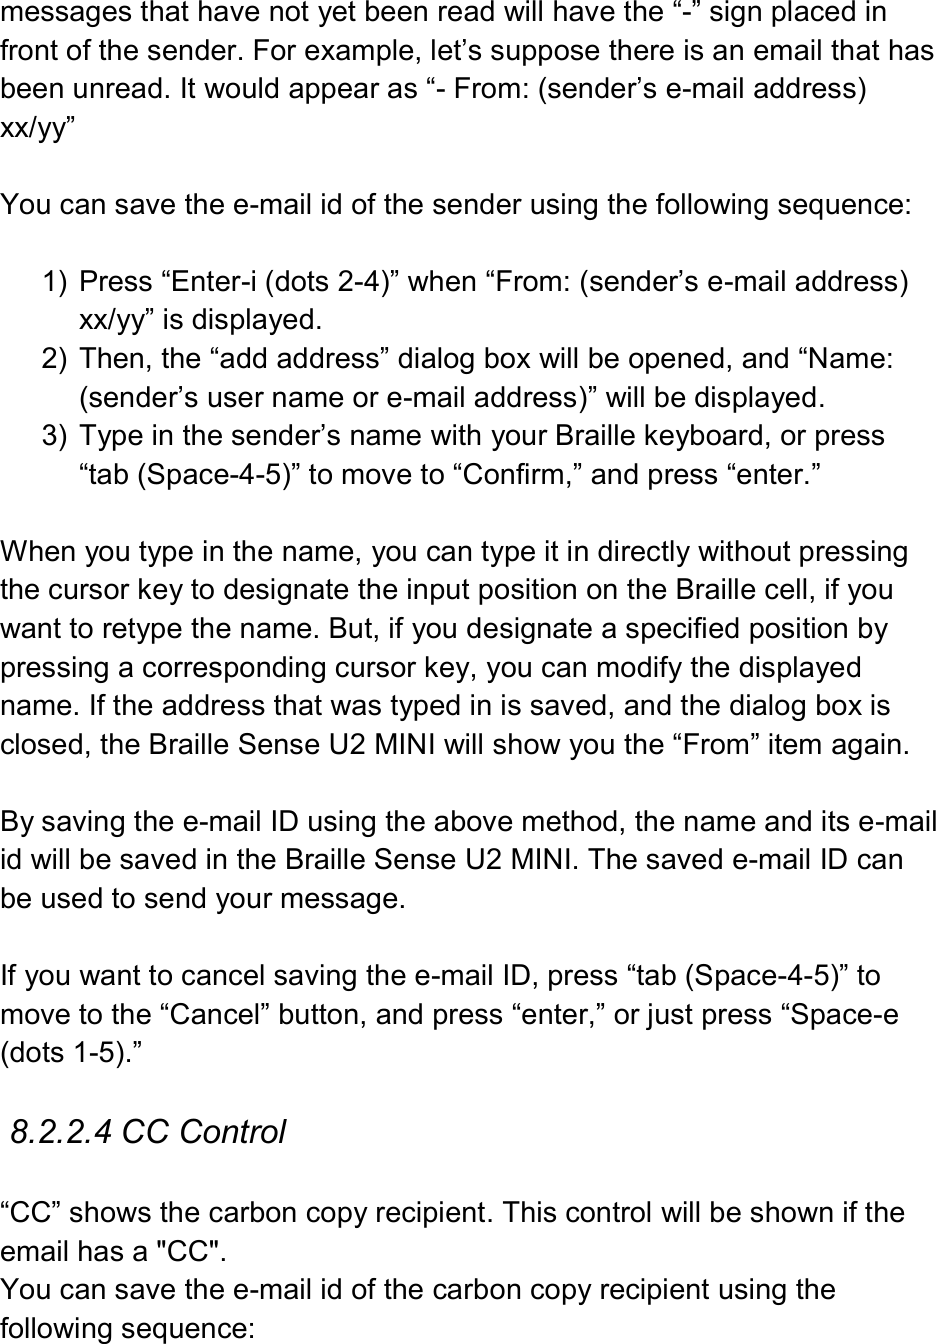  messages that have not yet been read will have the “-” sign placed in front of the sender. For example, let’s suppose there is an email that has been unread. It would appear as “- From: (sender’s e-mail address) xx/yy”  You can save the e-mail id of the sender using the following sequence:  1)  Press “Enter-i (dots 2-4)” when “From: (sender’s e-mail address) xx/yy” is displayed. 2)  Then, the “add address” dialog box will be opened, and “Name: (sender’s user name or e-mail address)” will be displayed. 3)  Type in the sender’s name with your Braille keyboard, or press “tab (Space-4-5)” to move to “Confirm,” and press “enter.”  When you type in the name, you can type it in directly without pressing the cursor key to designate the input position on the Braille cell, if you want to retype the name. But, if you designate a specified position by pressing a corresponding cursor key, you can modify the displayed name. If the address that was typed in is saved, and the dialog box is closed, the Braille Sense U2 MINI will show you the “From” item again.  By saving the e-mail ID using the above method, the name and its e-mail id will be saved in the Braille Sense U2 MINI. The saved e-mail ID can be used to send your message.    If you want to cancel saving the e-mail ID, press “tab (Space-4-5)” to move to the “Cancel” button, and press “enter,” or just press “Space-e (dots 1-5).”  8.2.2.4 CC Control  “CC” shows the carbon copy recipient. This control will be shown if the email has a &quot;CC&quot;. You can save the e-mail id of the carbon copy recipient using the following sequence:  